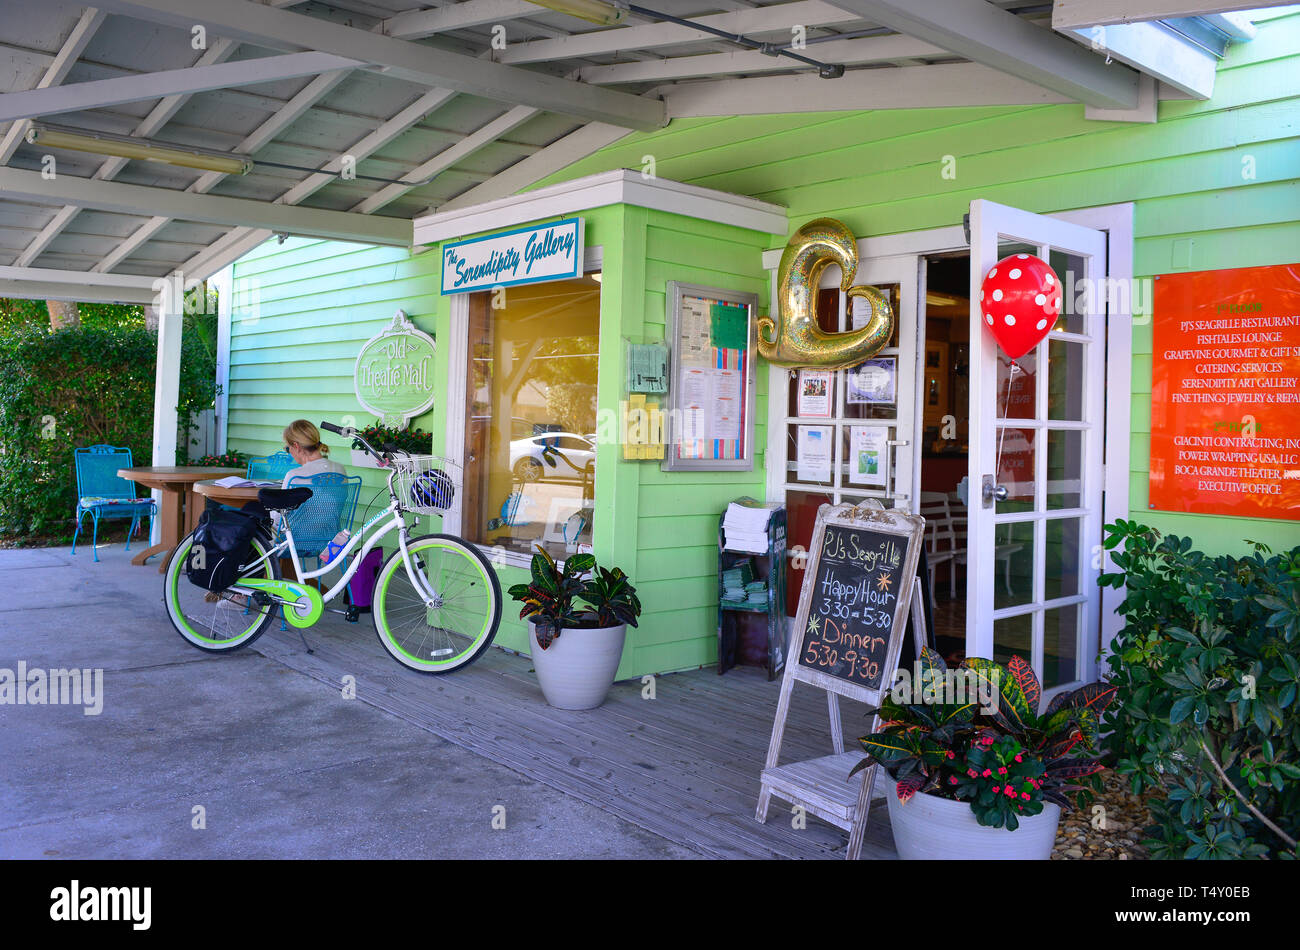 A welcoming entrance to PJs Seagrille and the Serendipity Gallery with patio cafe and colorful vibe in Boca Grande, FL on Gasparilla Island Stock Photo